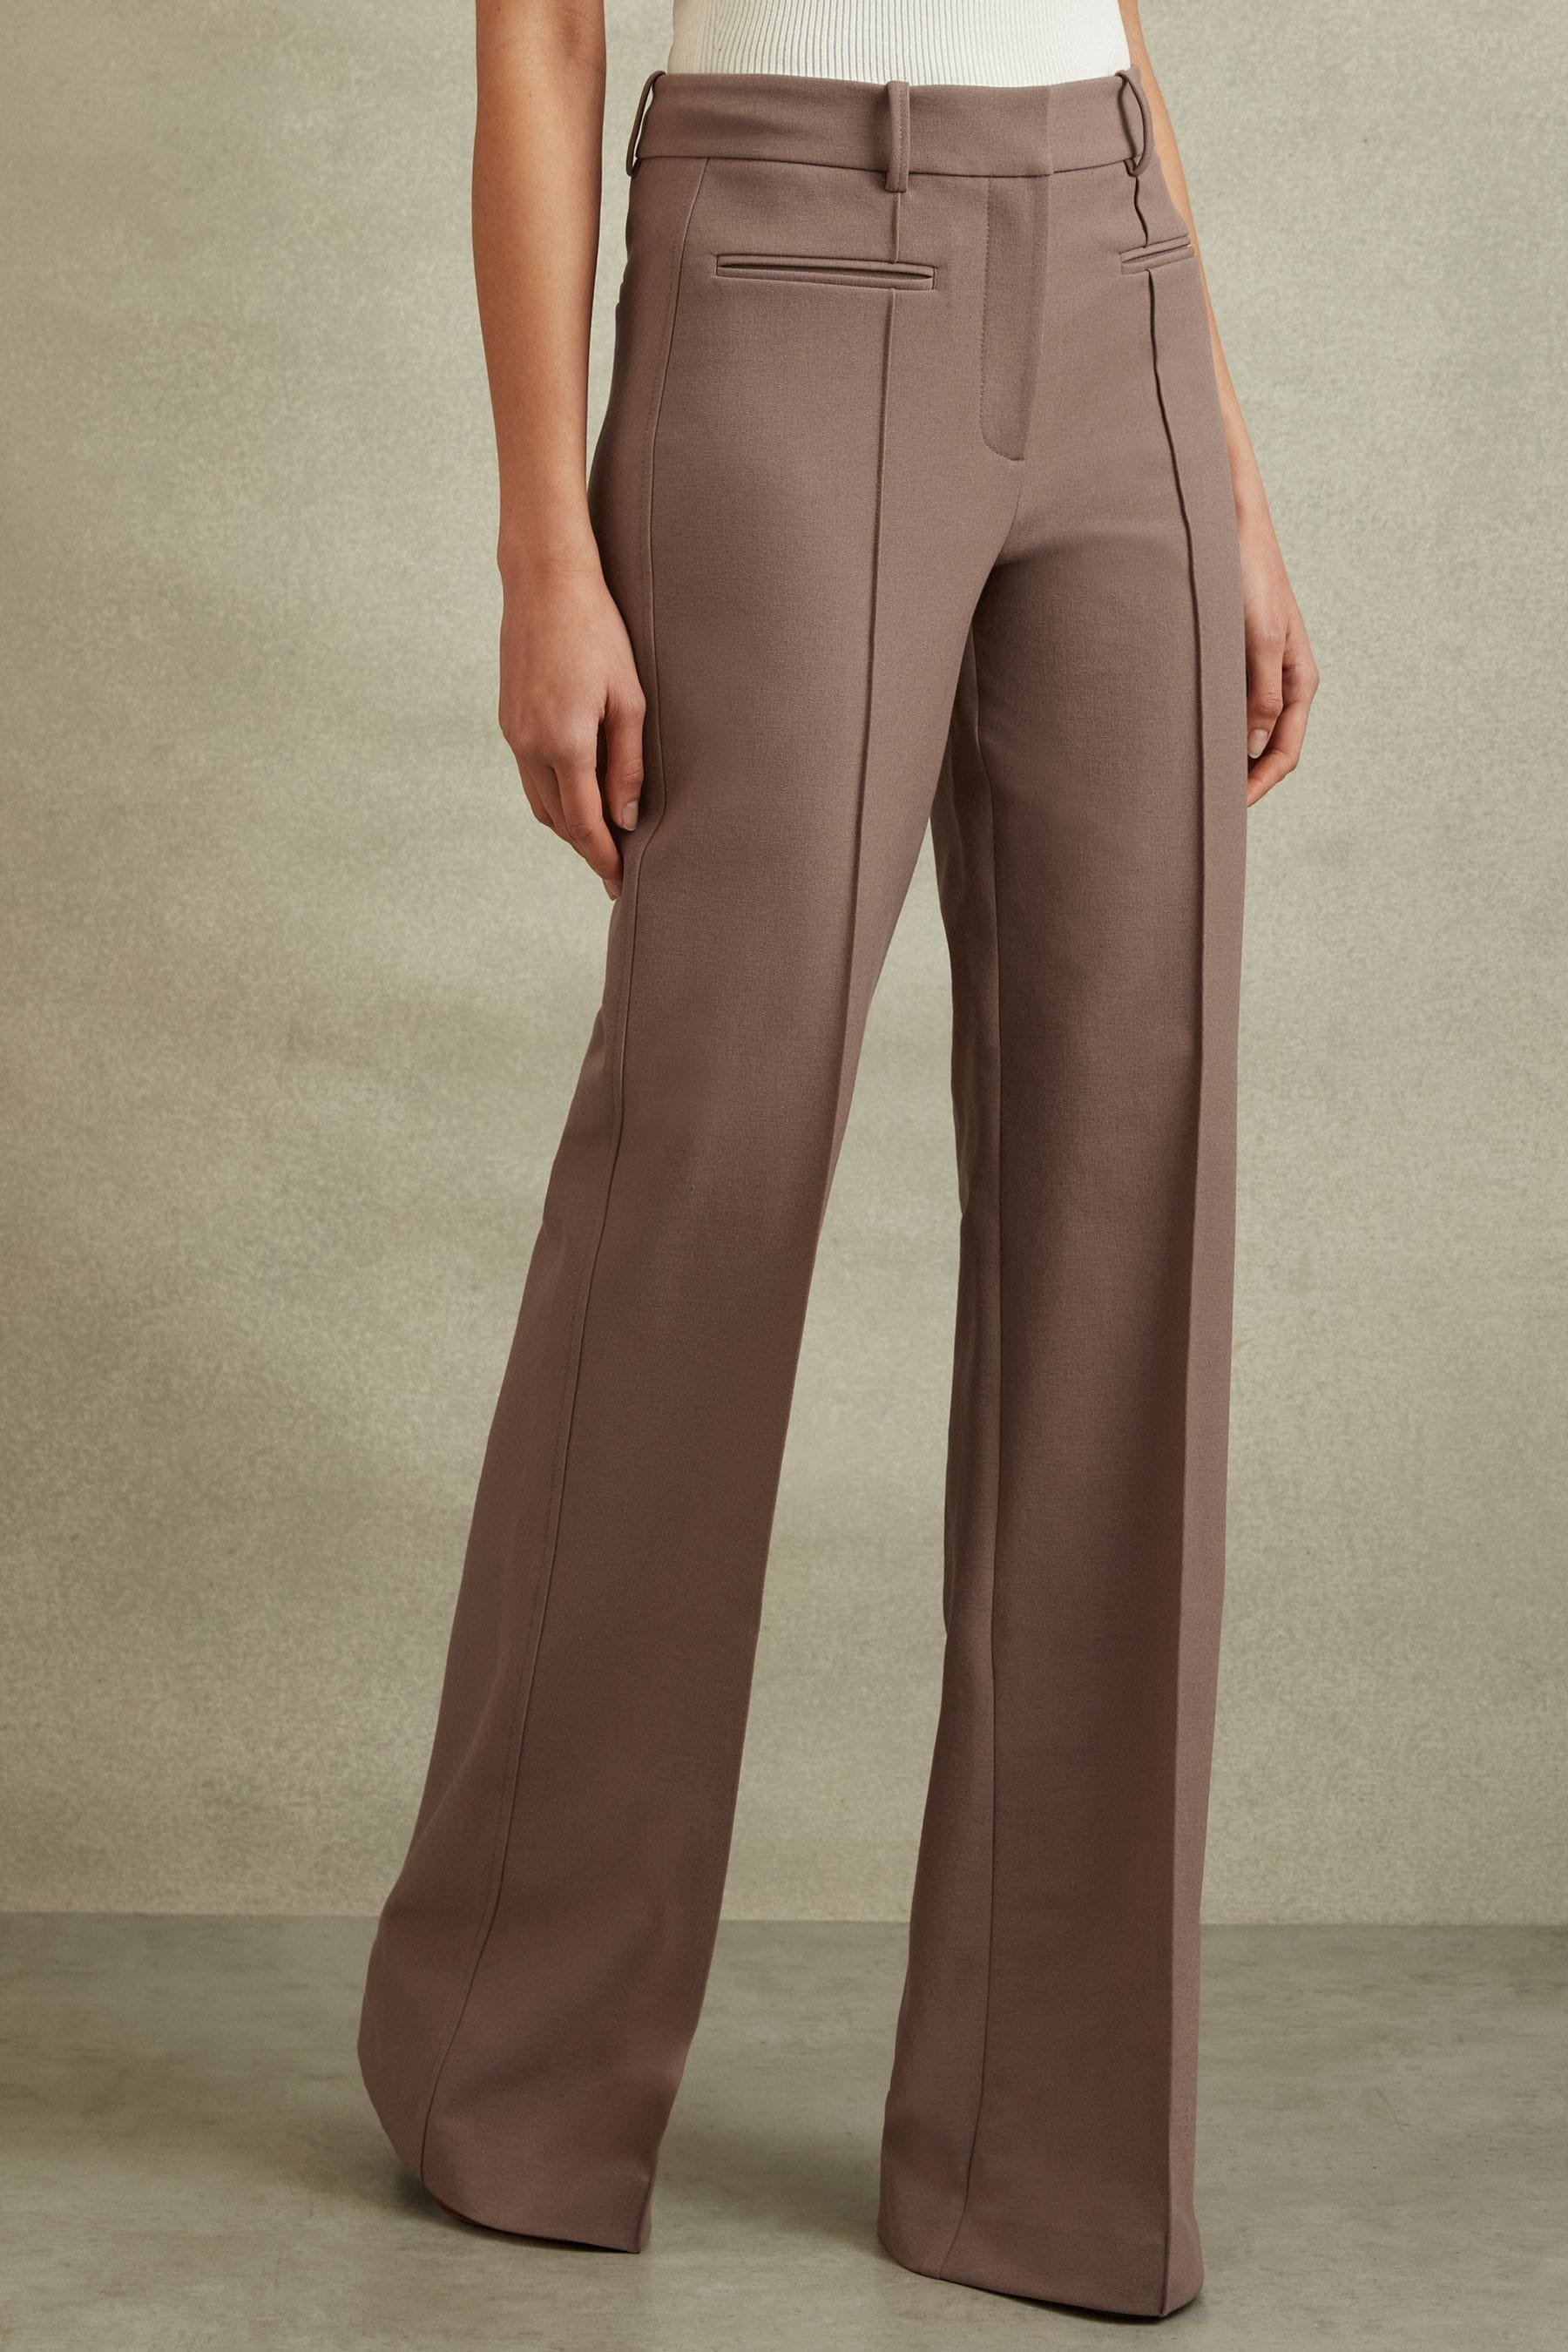 Reiss Claude - Mink Neutral Petite High Rise Flared Trousers, 14